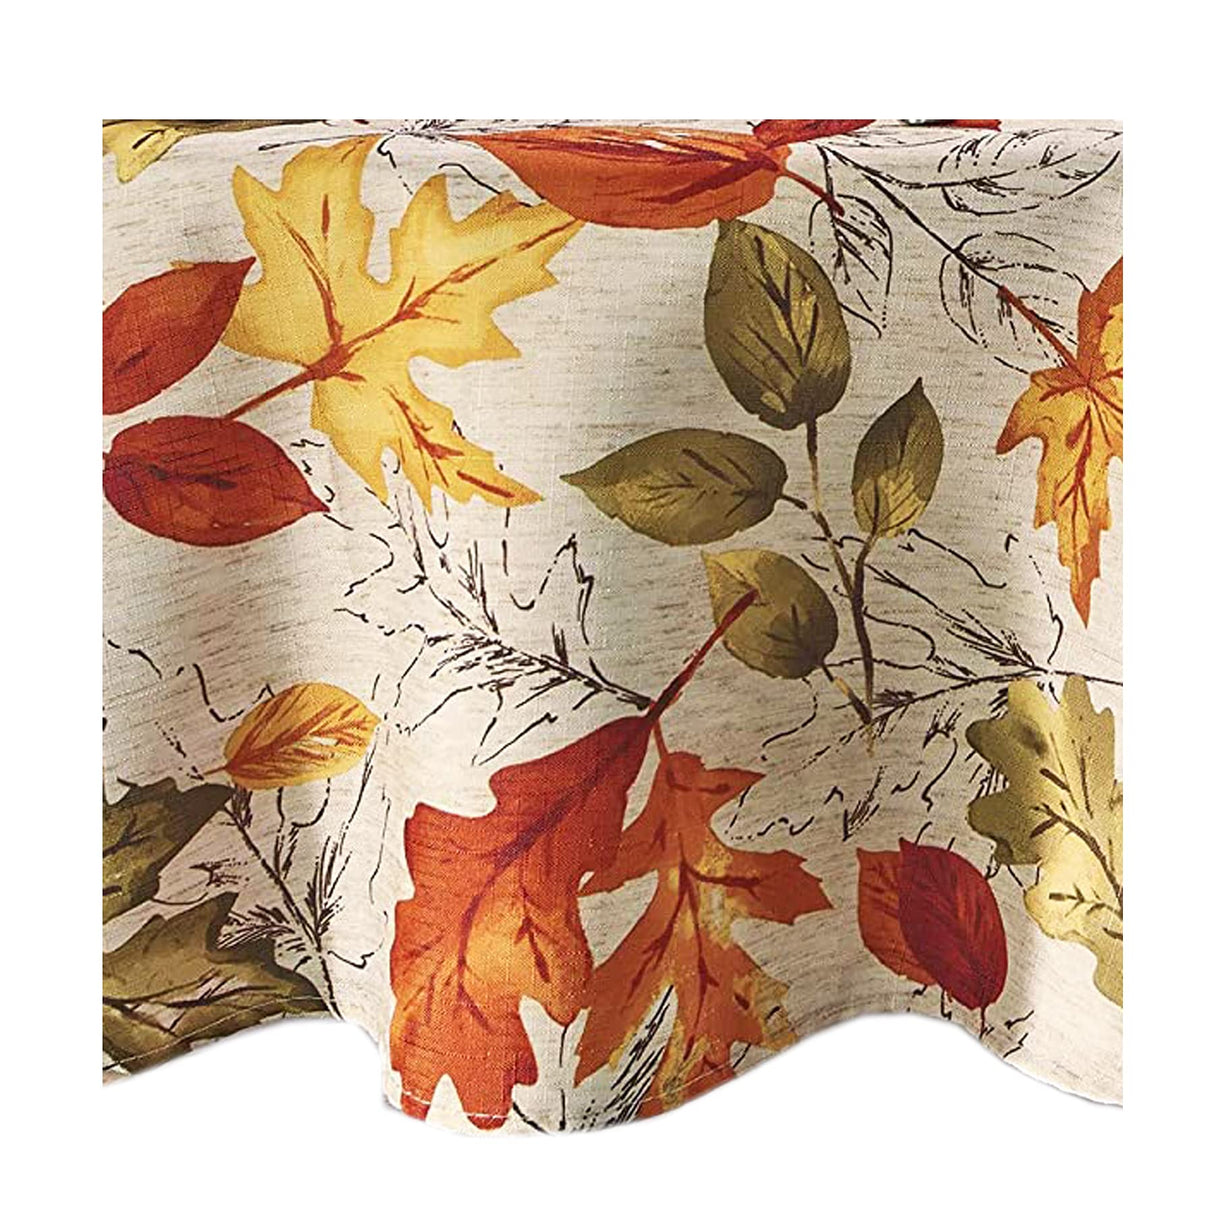 Newbridge Breezy Autumn Foliage Thanksgiving Fabric Tablecloth, Contemporary Bold Colorful Fall Leaves Soil Resistant Easy Care Tablecloth, 52” x 70” Oblong/Rectangle